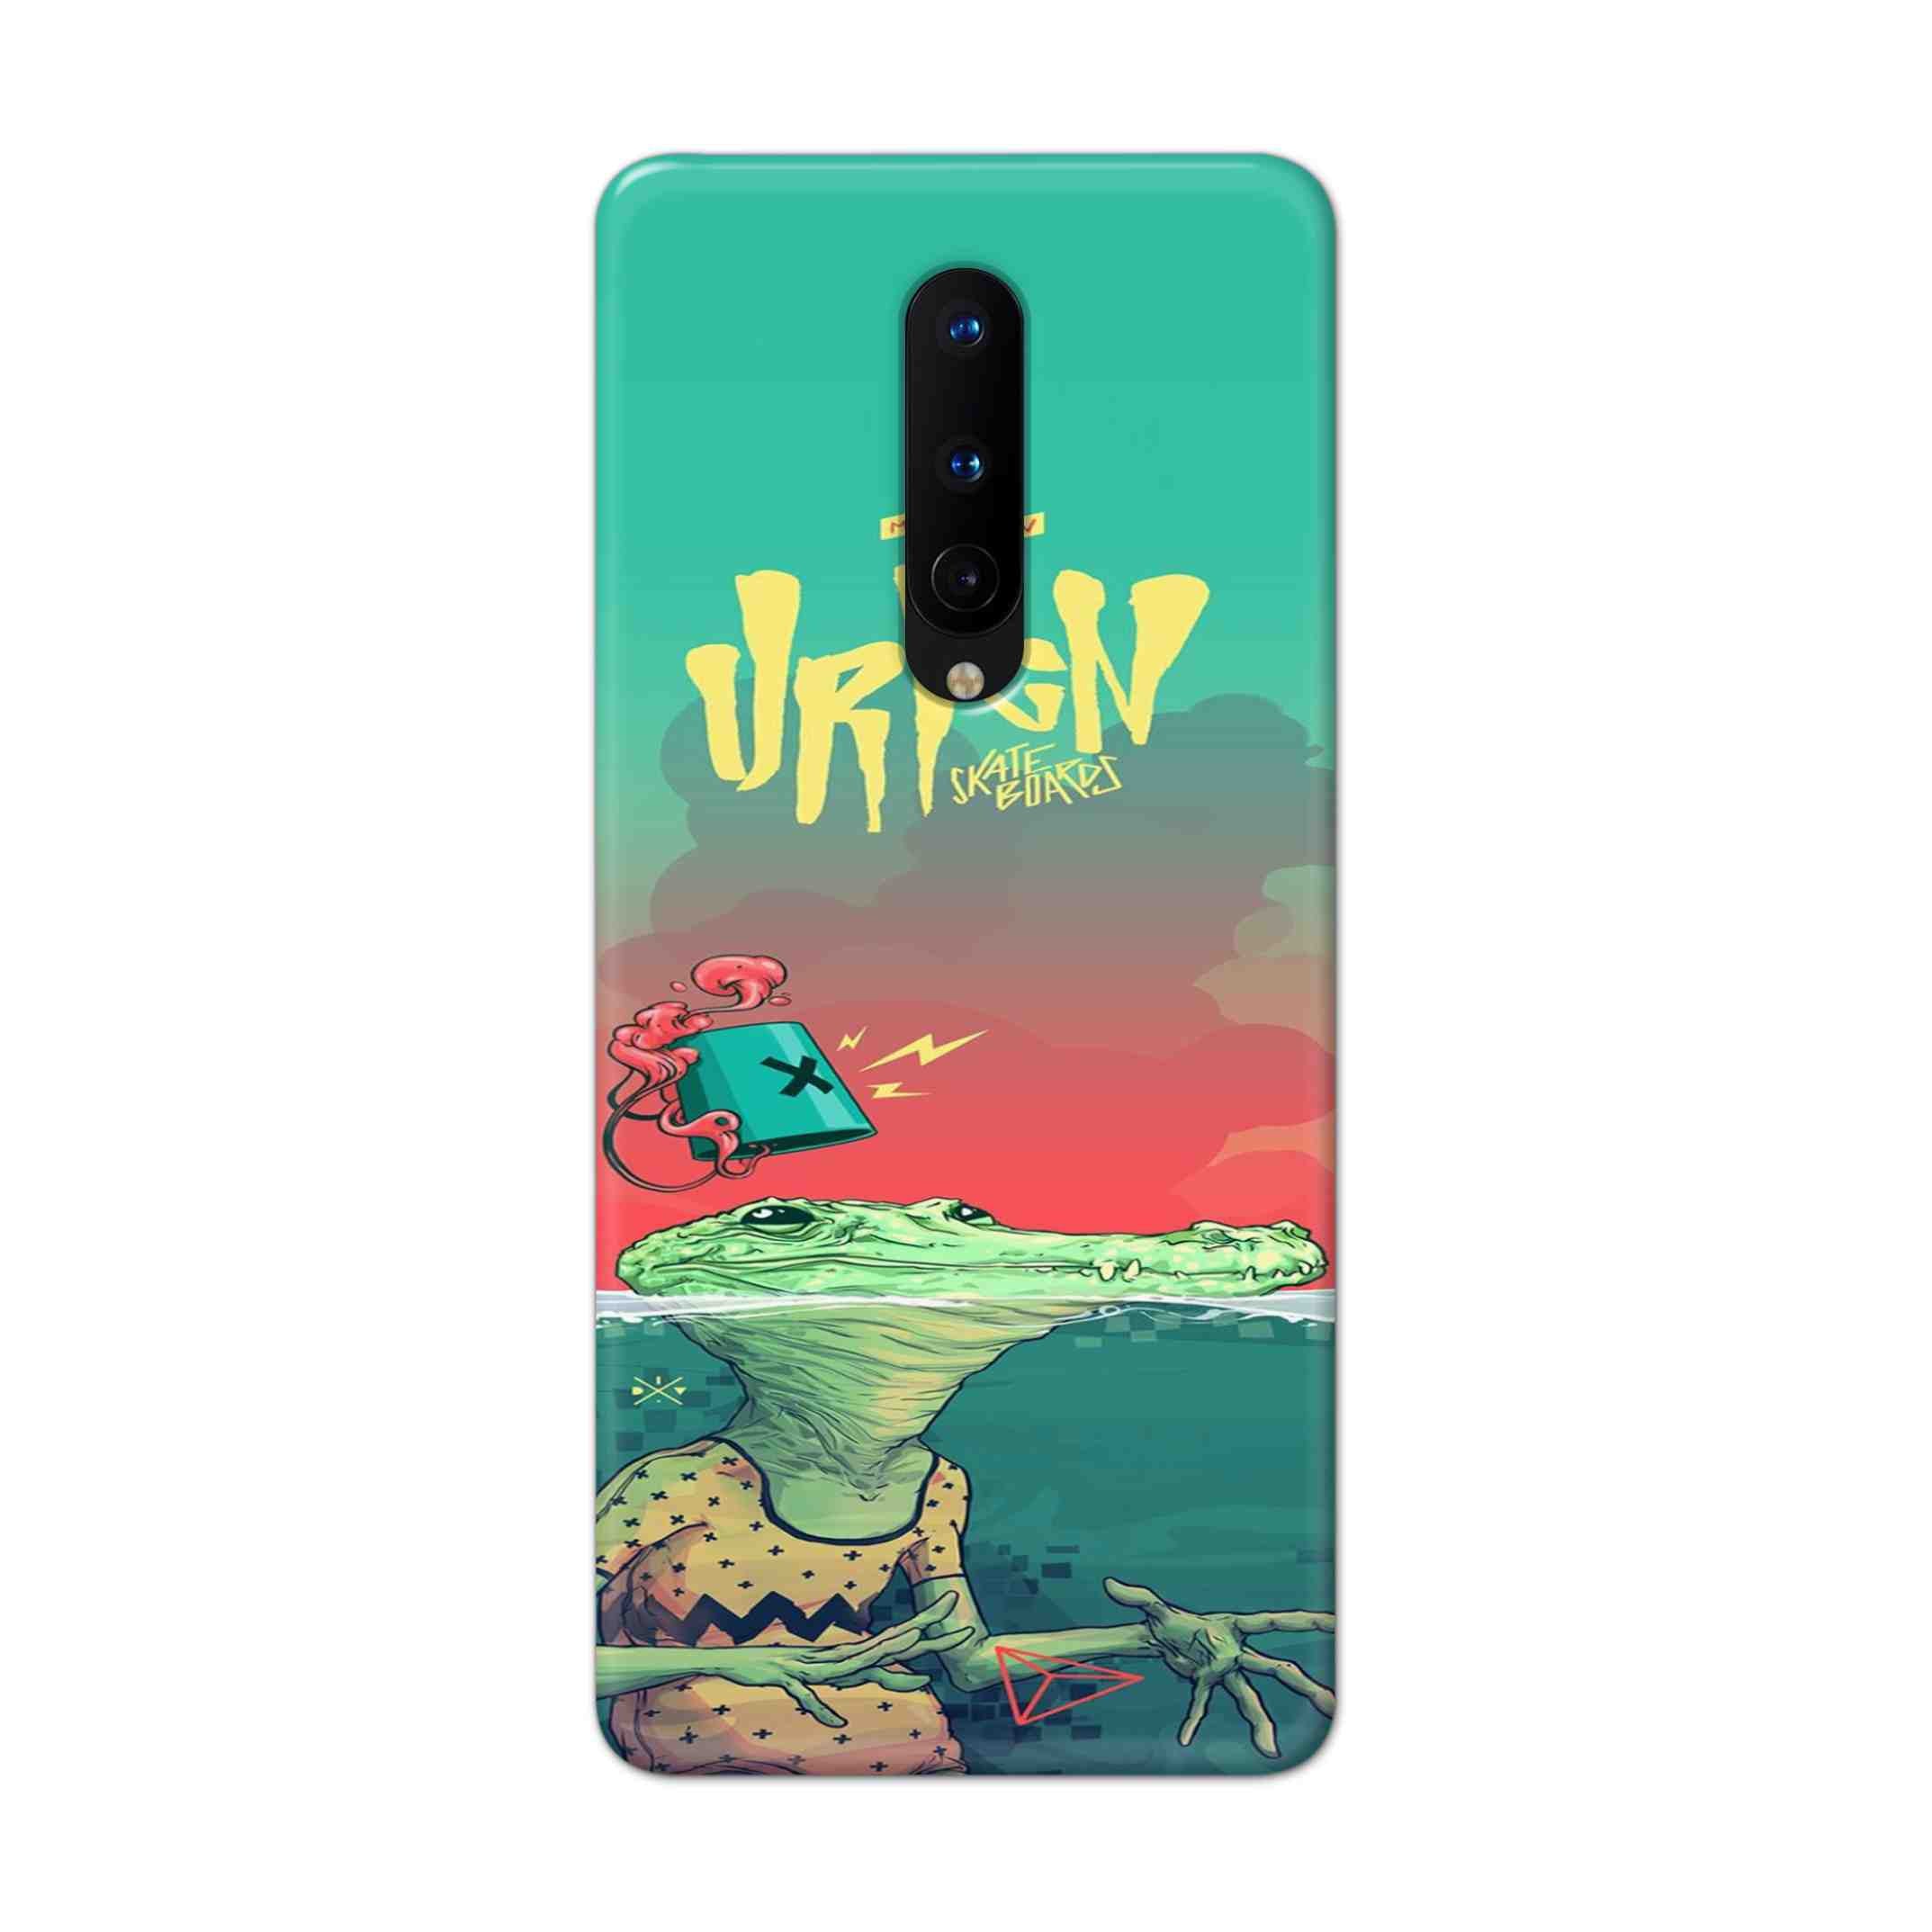 Buy Urkin Hard Back Mobile Phone Case Cover For OnePlus 8 Online